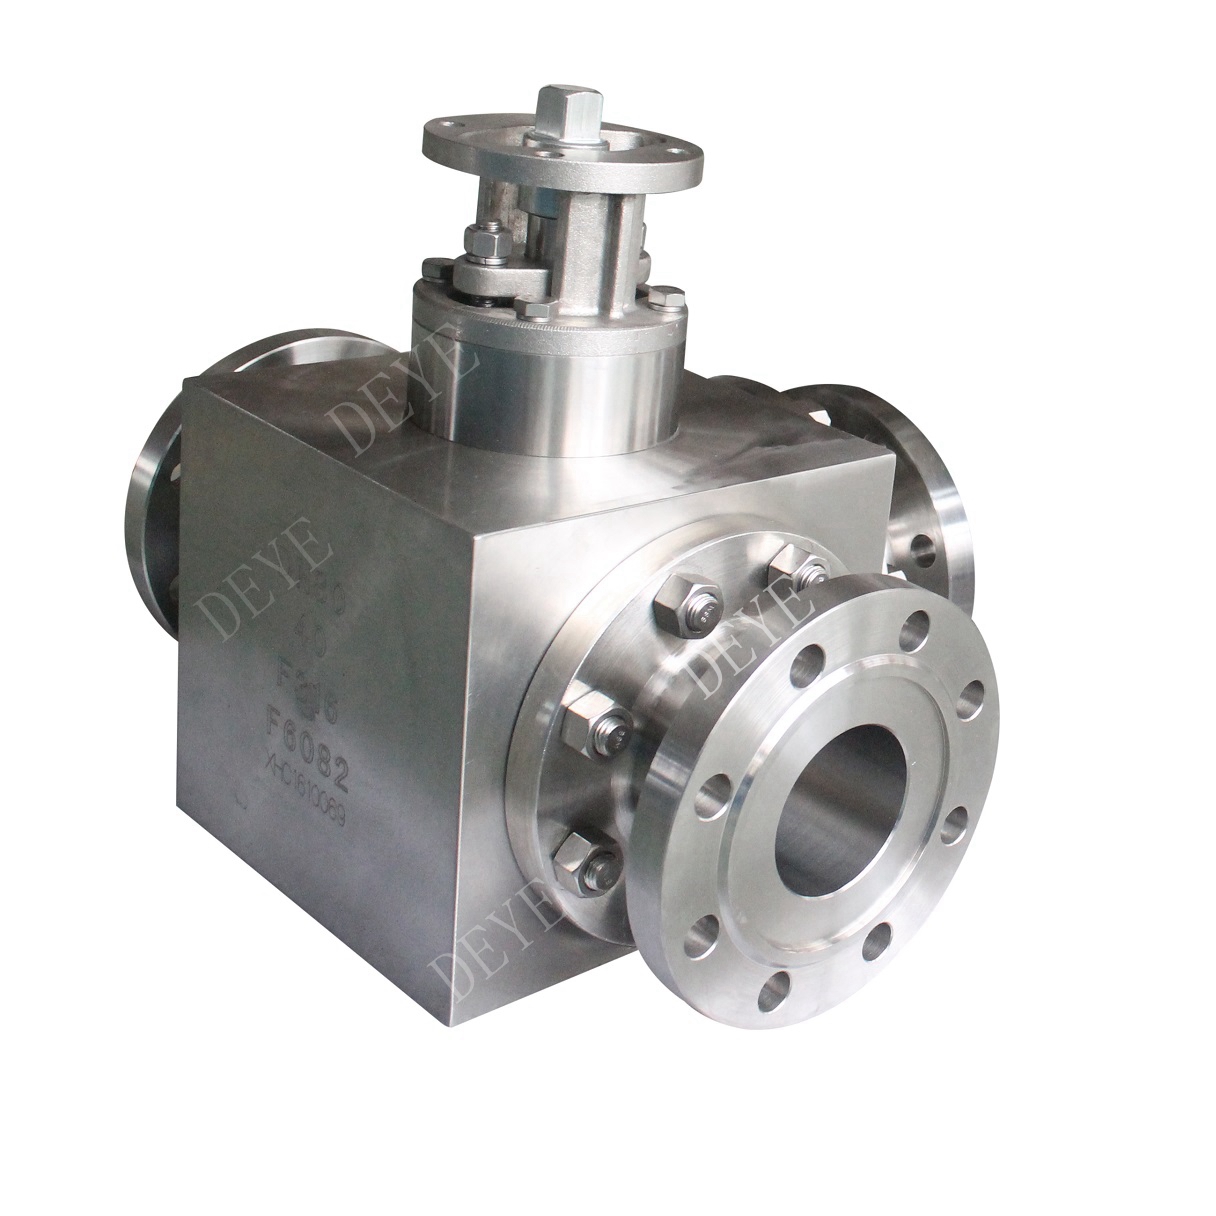 Discount Price 1piece Ball Valve -
  300LBS stainless steel 3-way ball valve with Flanged ends  BV-300-3WYF – Deye